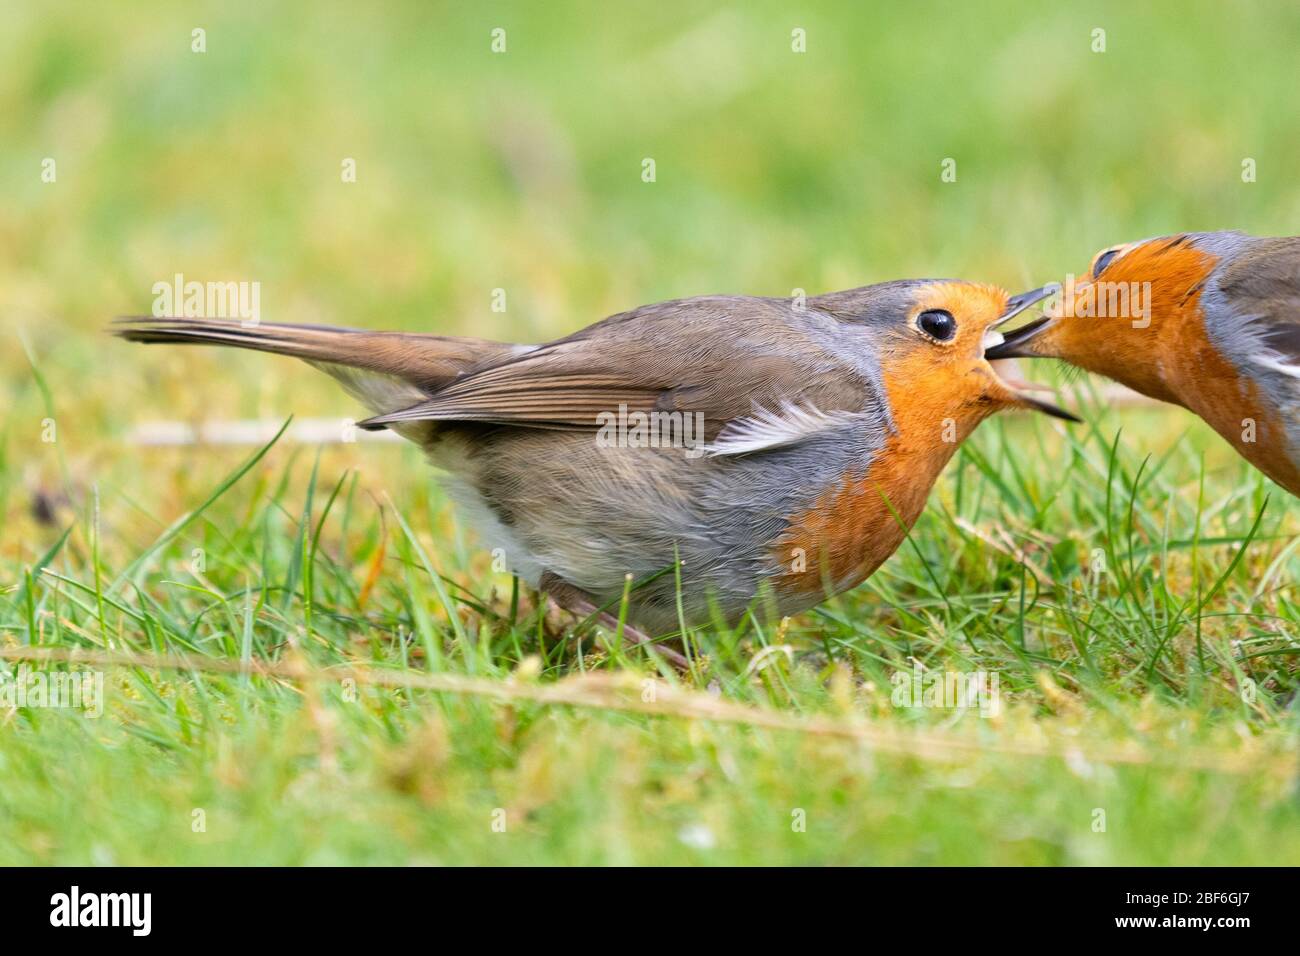 Two robins Courtship feeding - a female robin accepts food (suet pellet) from her mate - uk Stock Photo